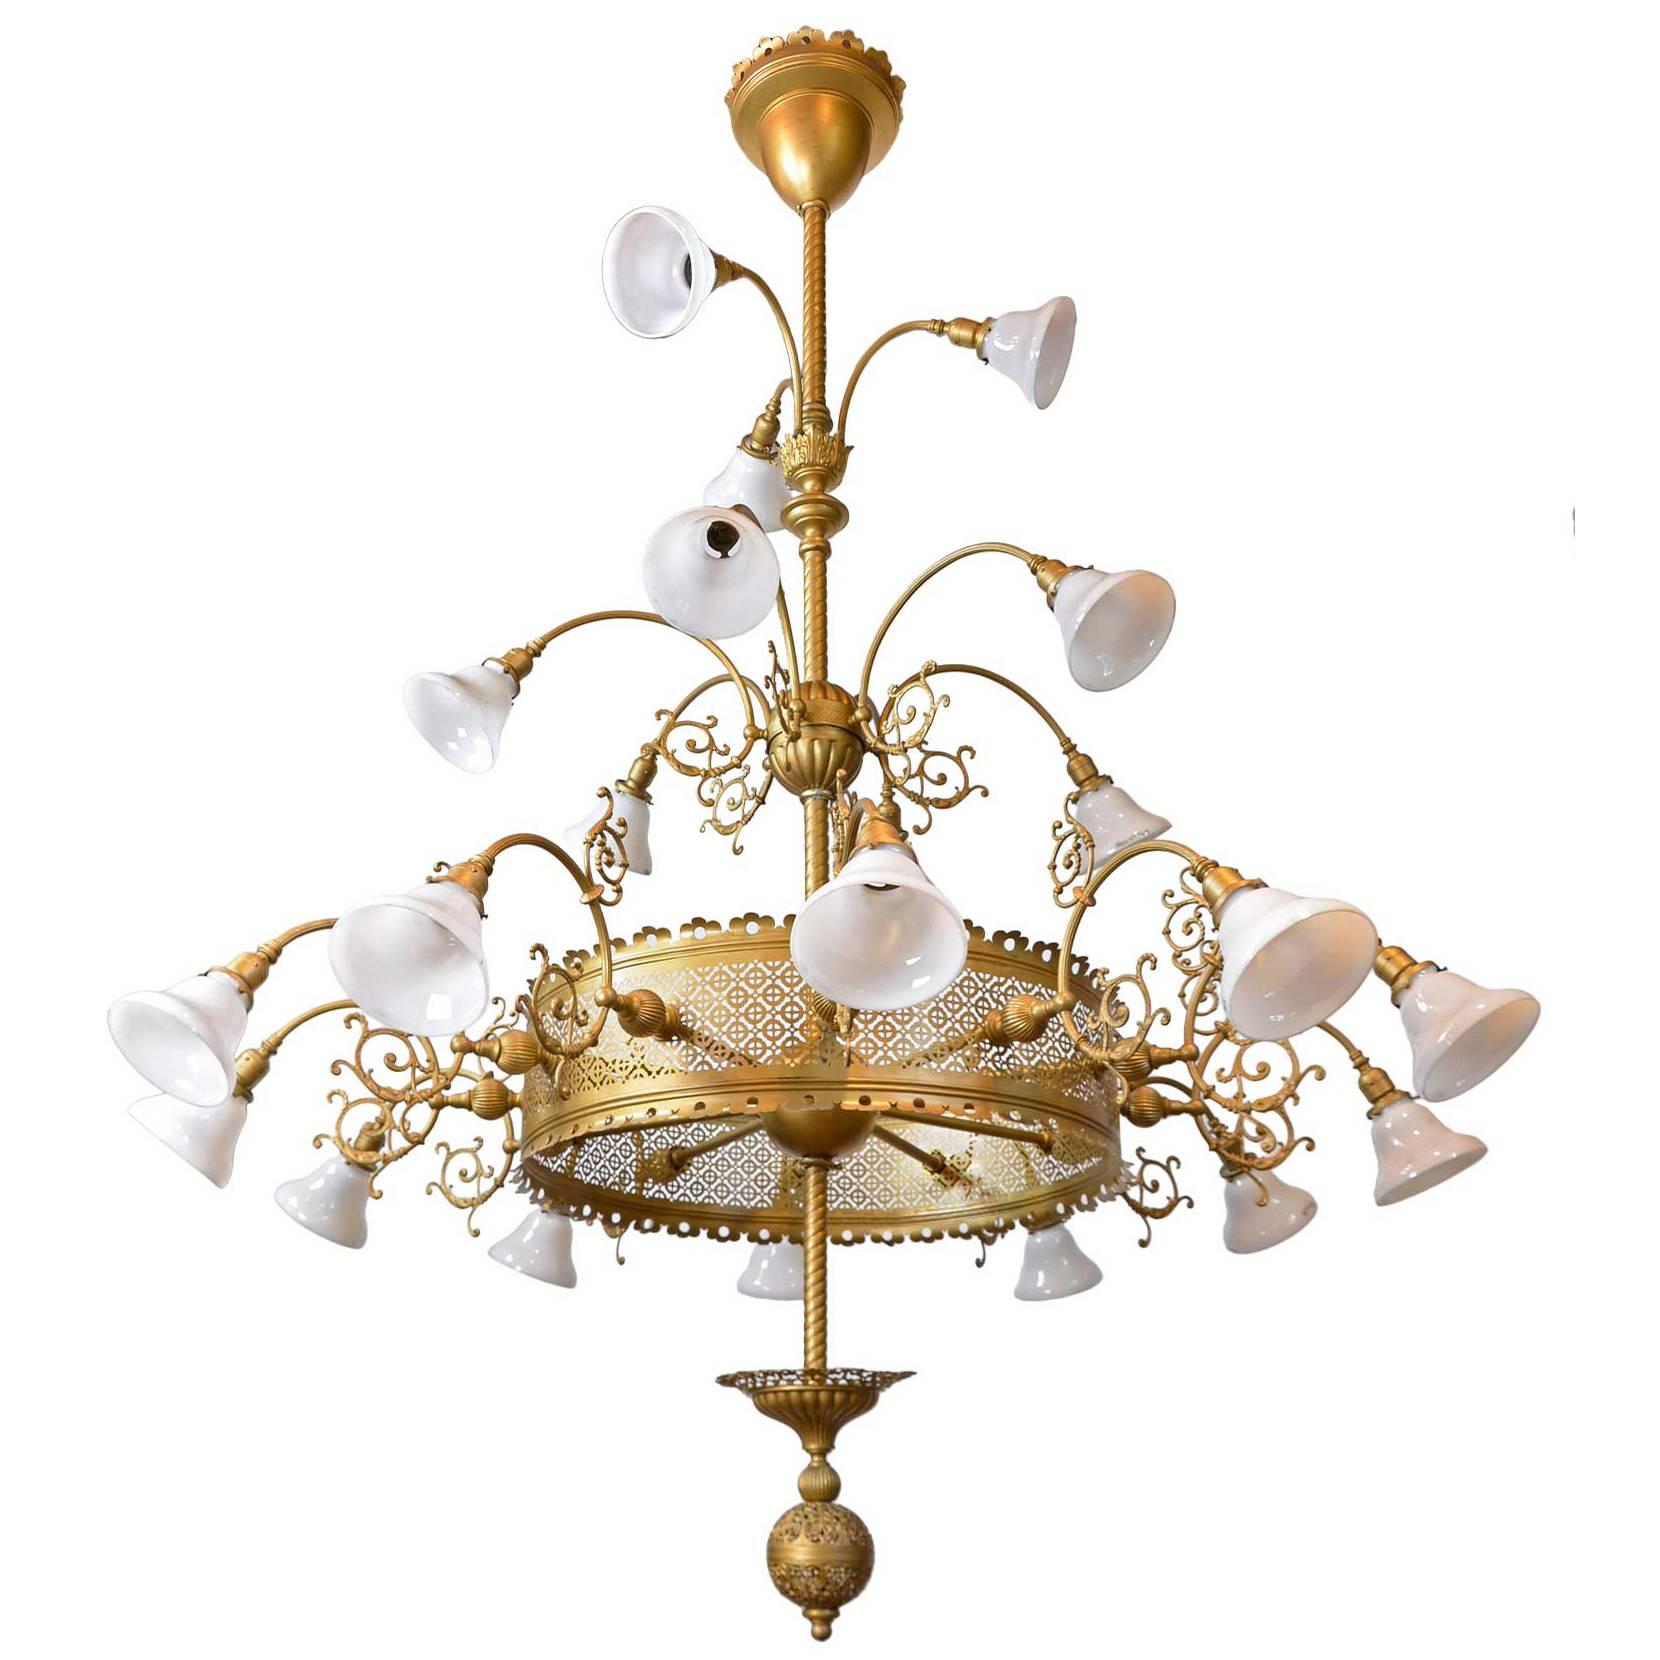 Extravagant Multi-Tiered Gothic Chandelier with Original Glass For Sale